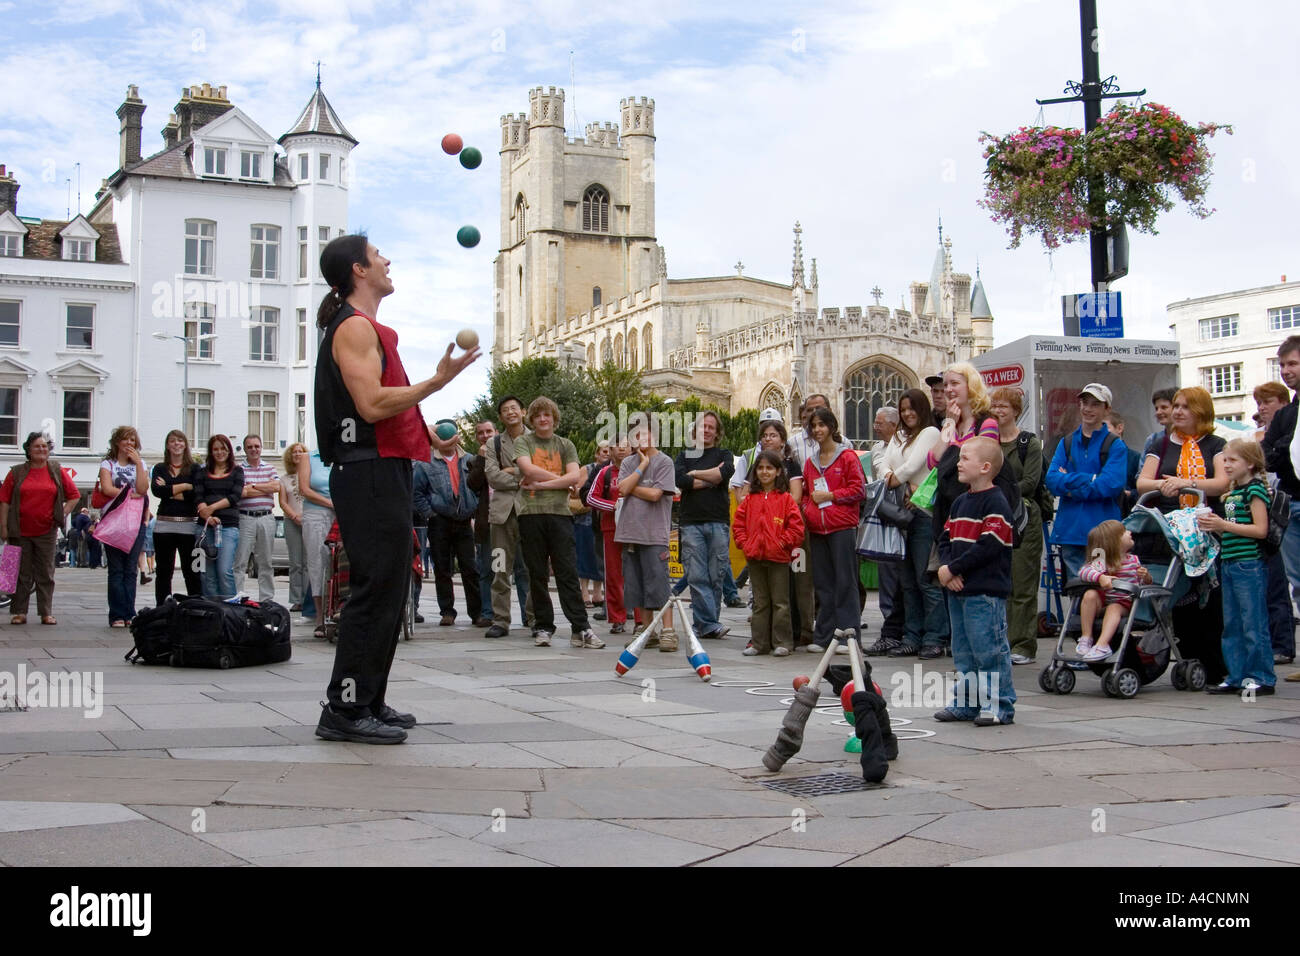 Juggling street performer pulls a crowd in Cambridge market square, England Stock Photo